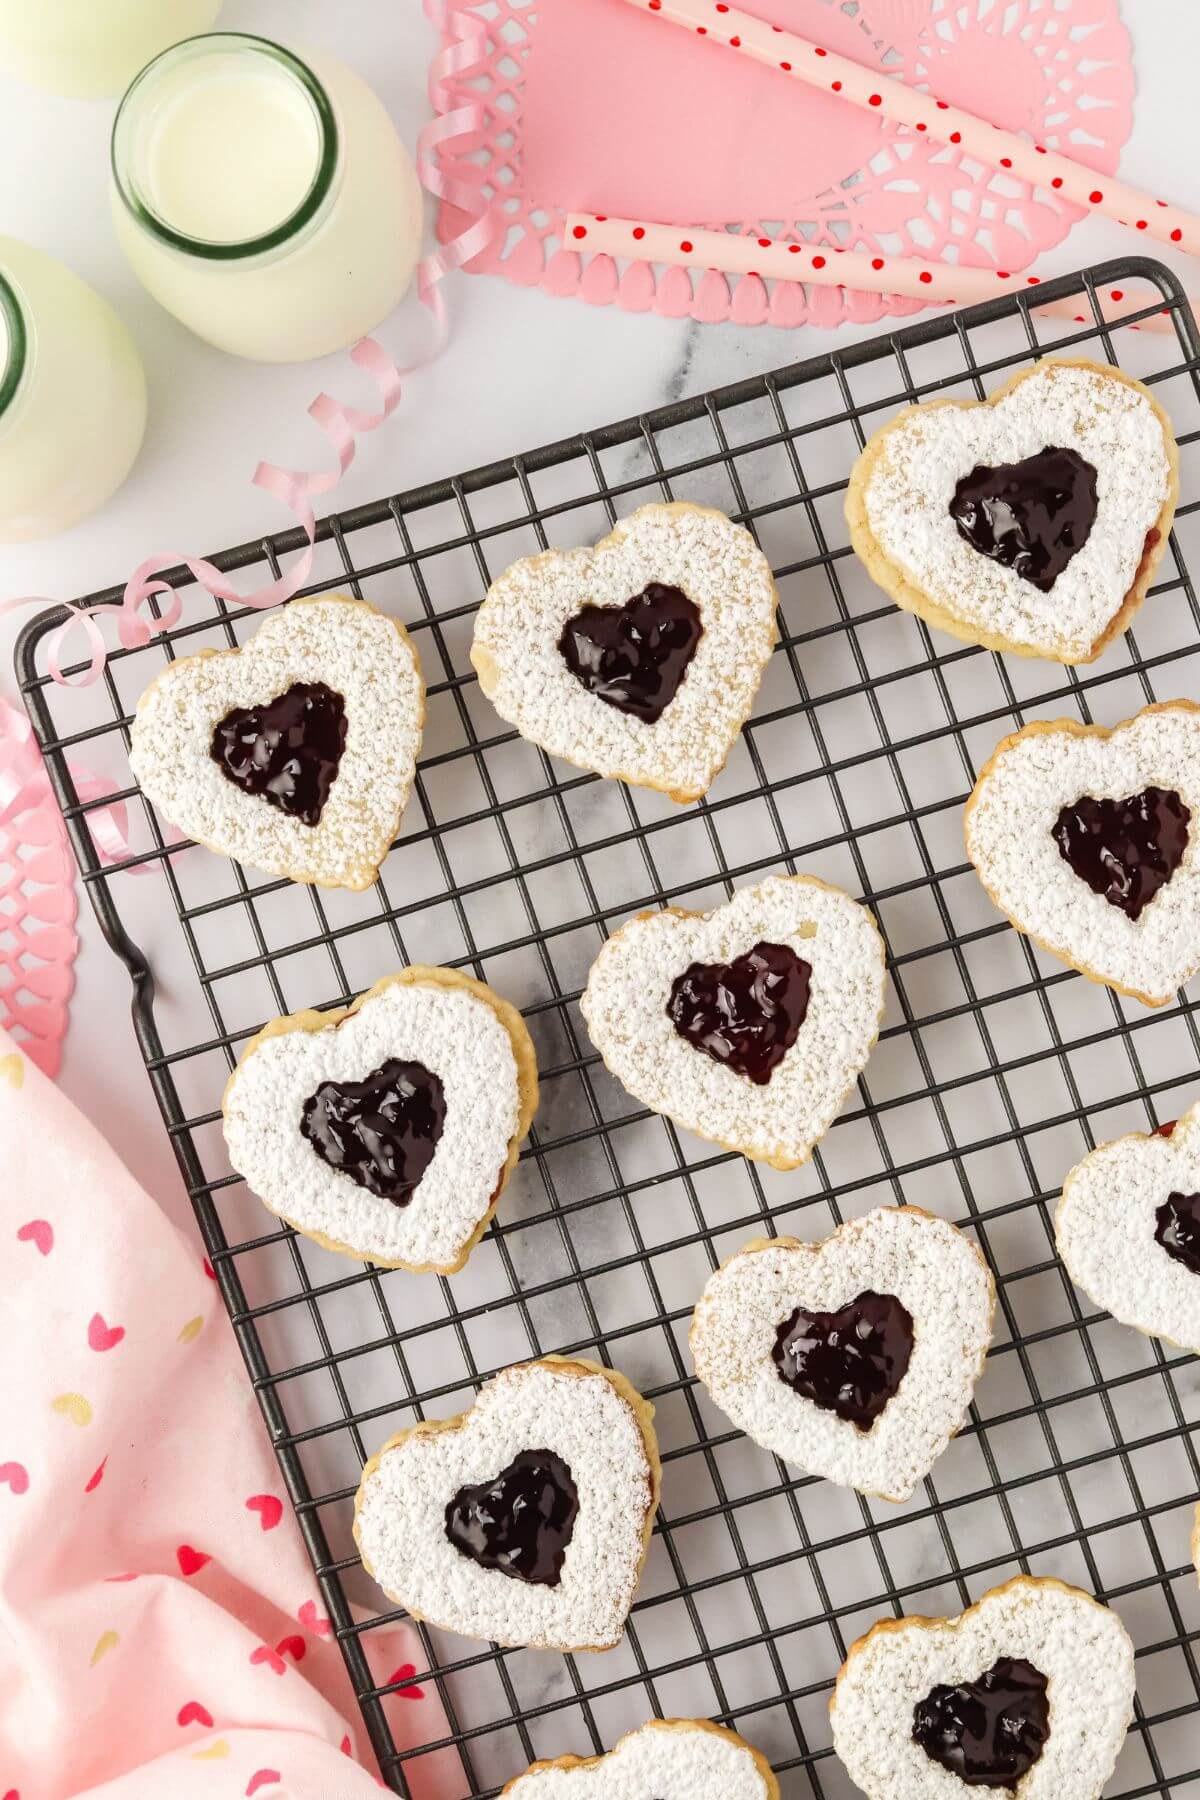 Heart cookies are in rows on a wire rack above pink decorations.